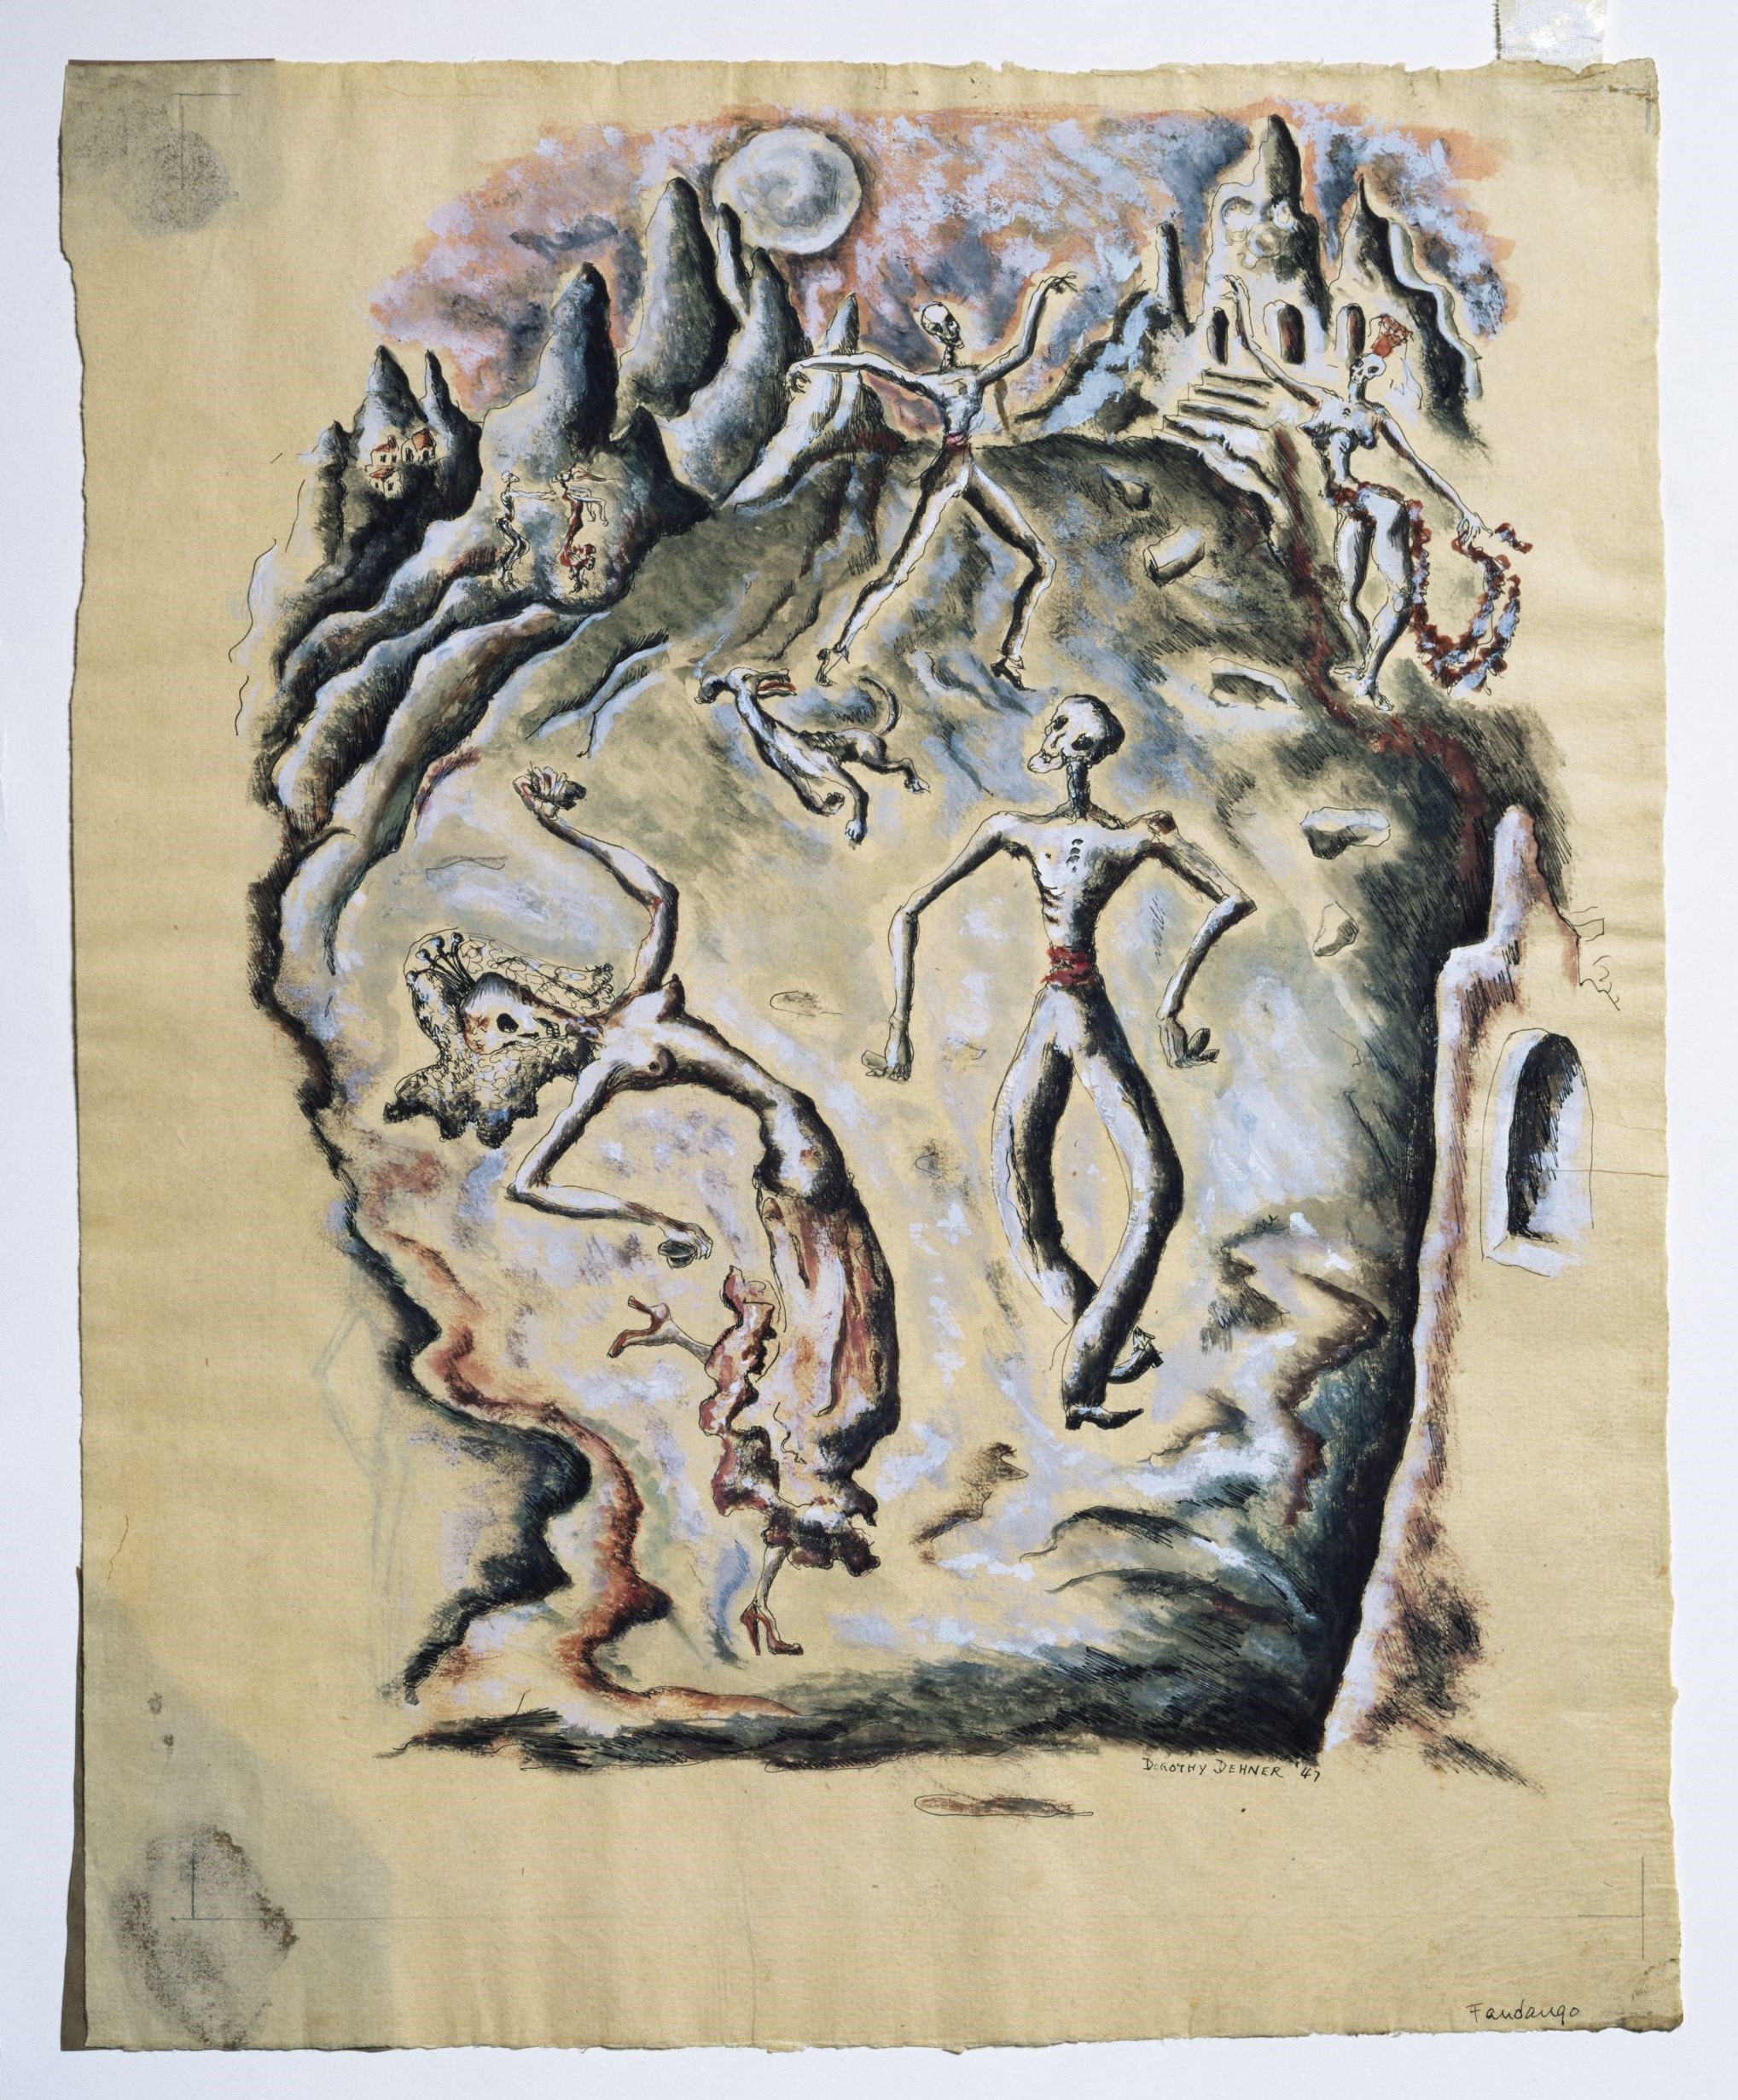 Drawing of emaciated figures moving toward a distant building in an apocalyptic landscape